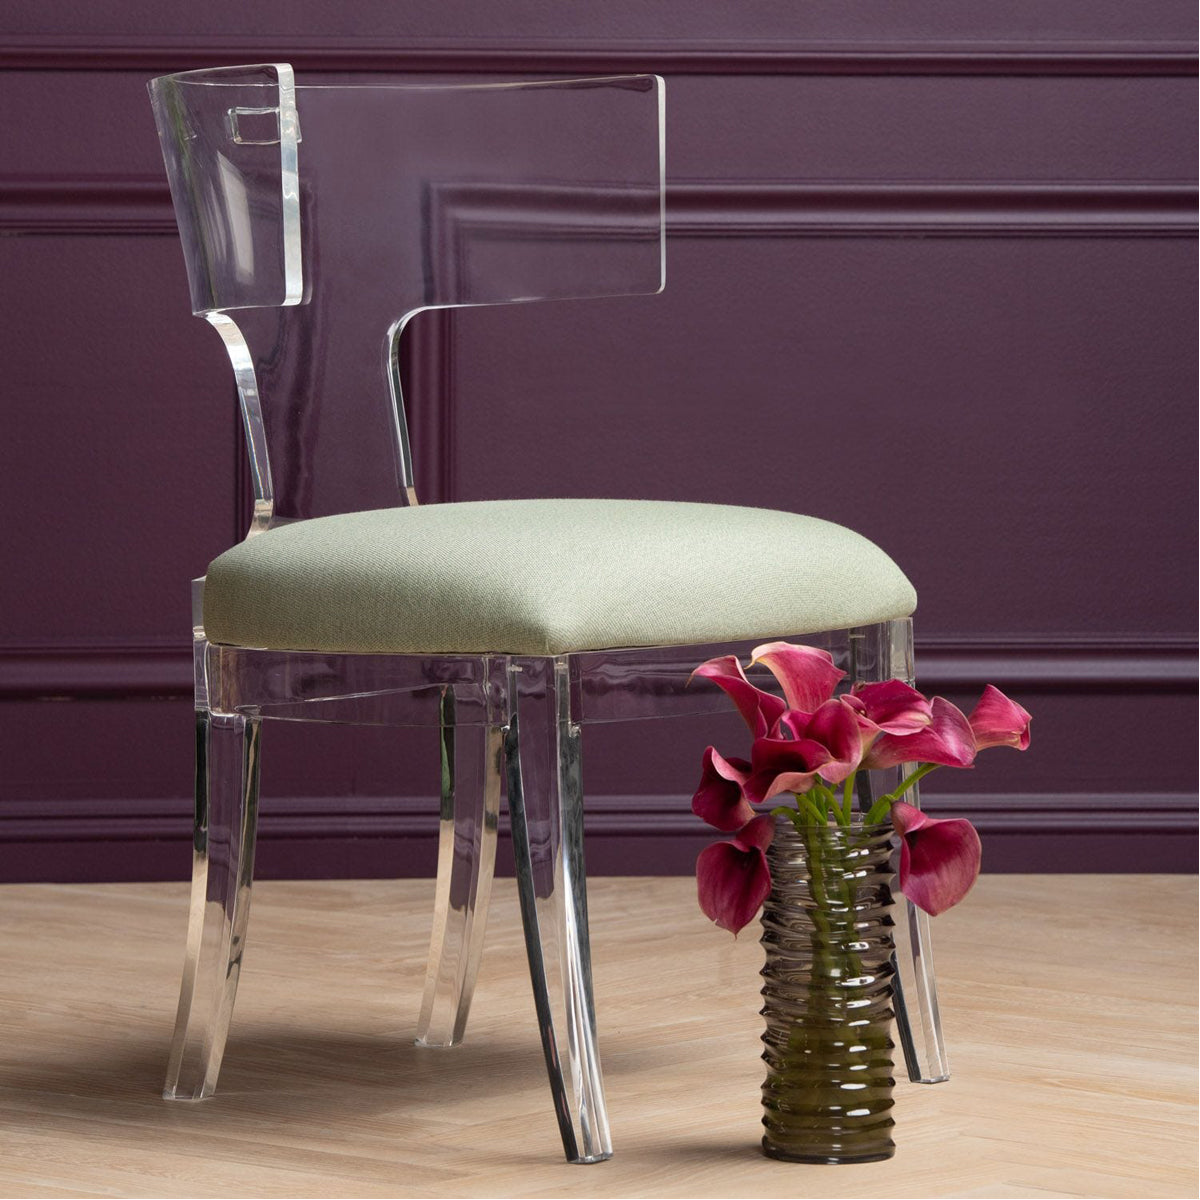 Made Goods Gibson Acrylic Wingback Dining Chair in Danube Mix Fabric